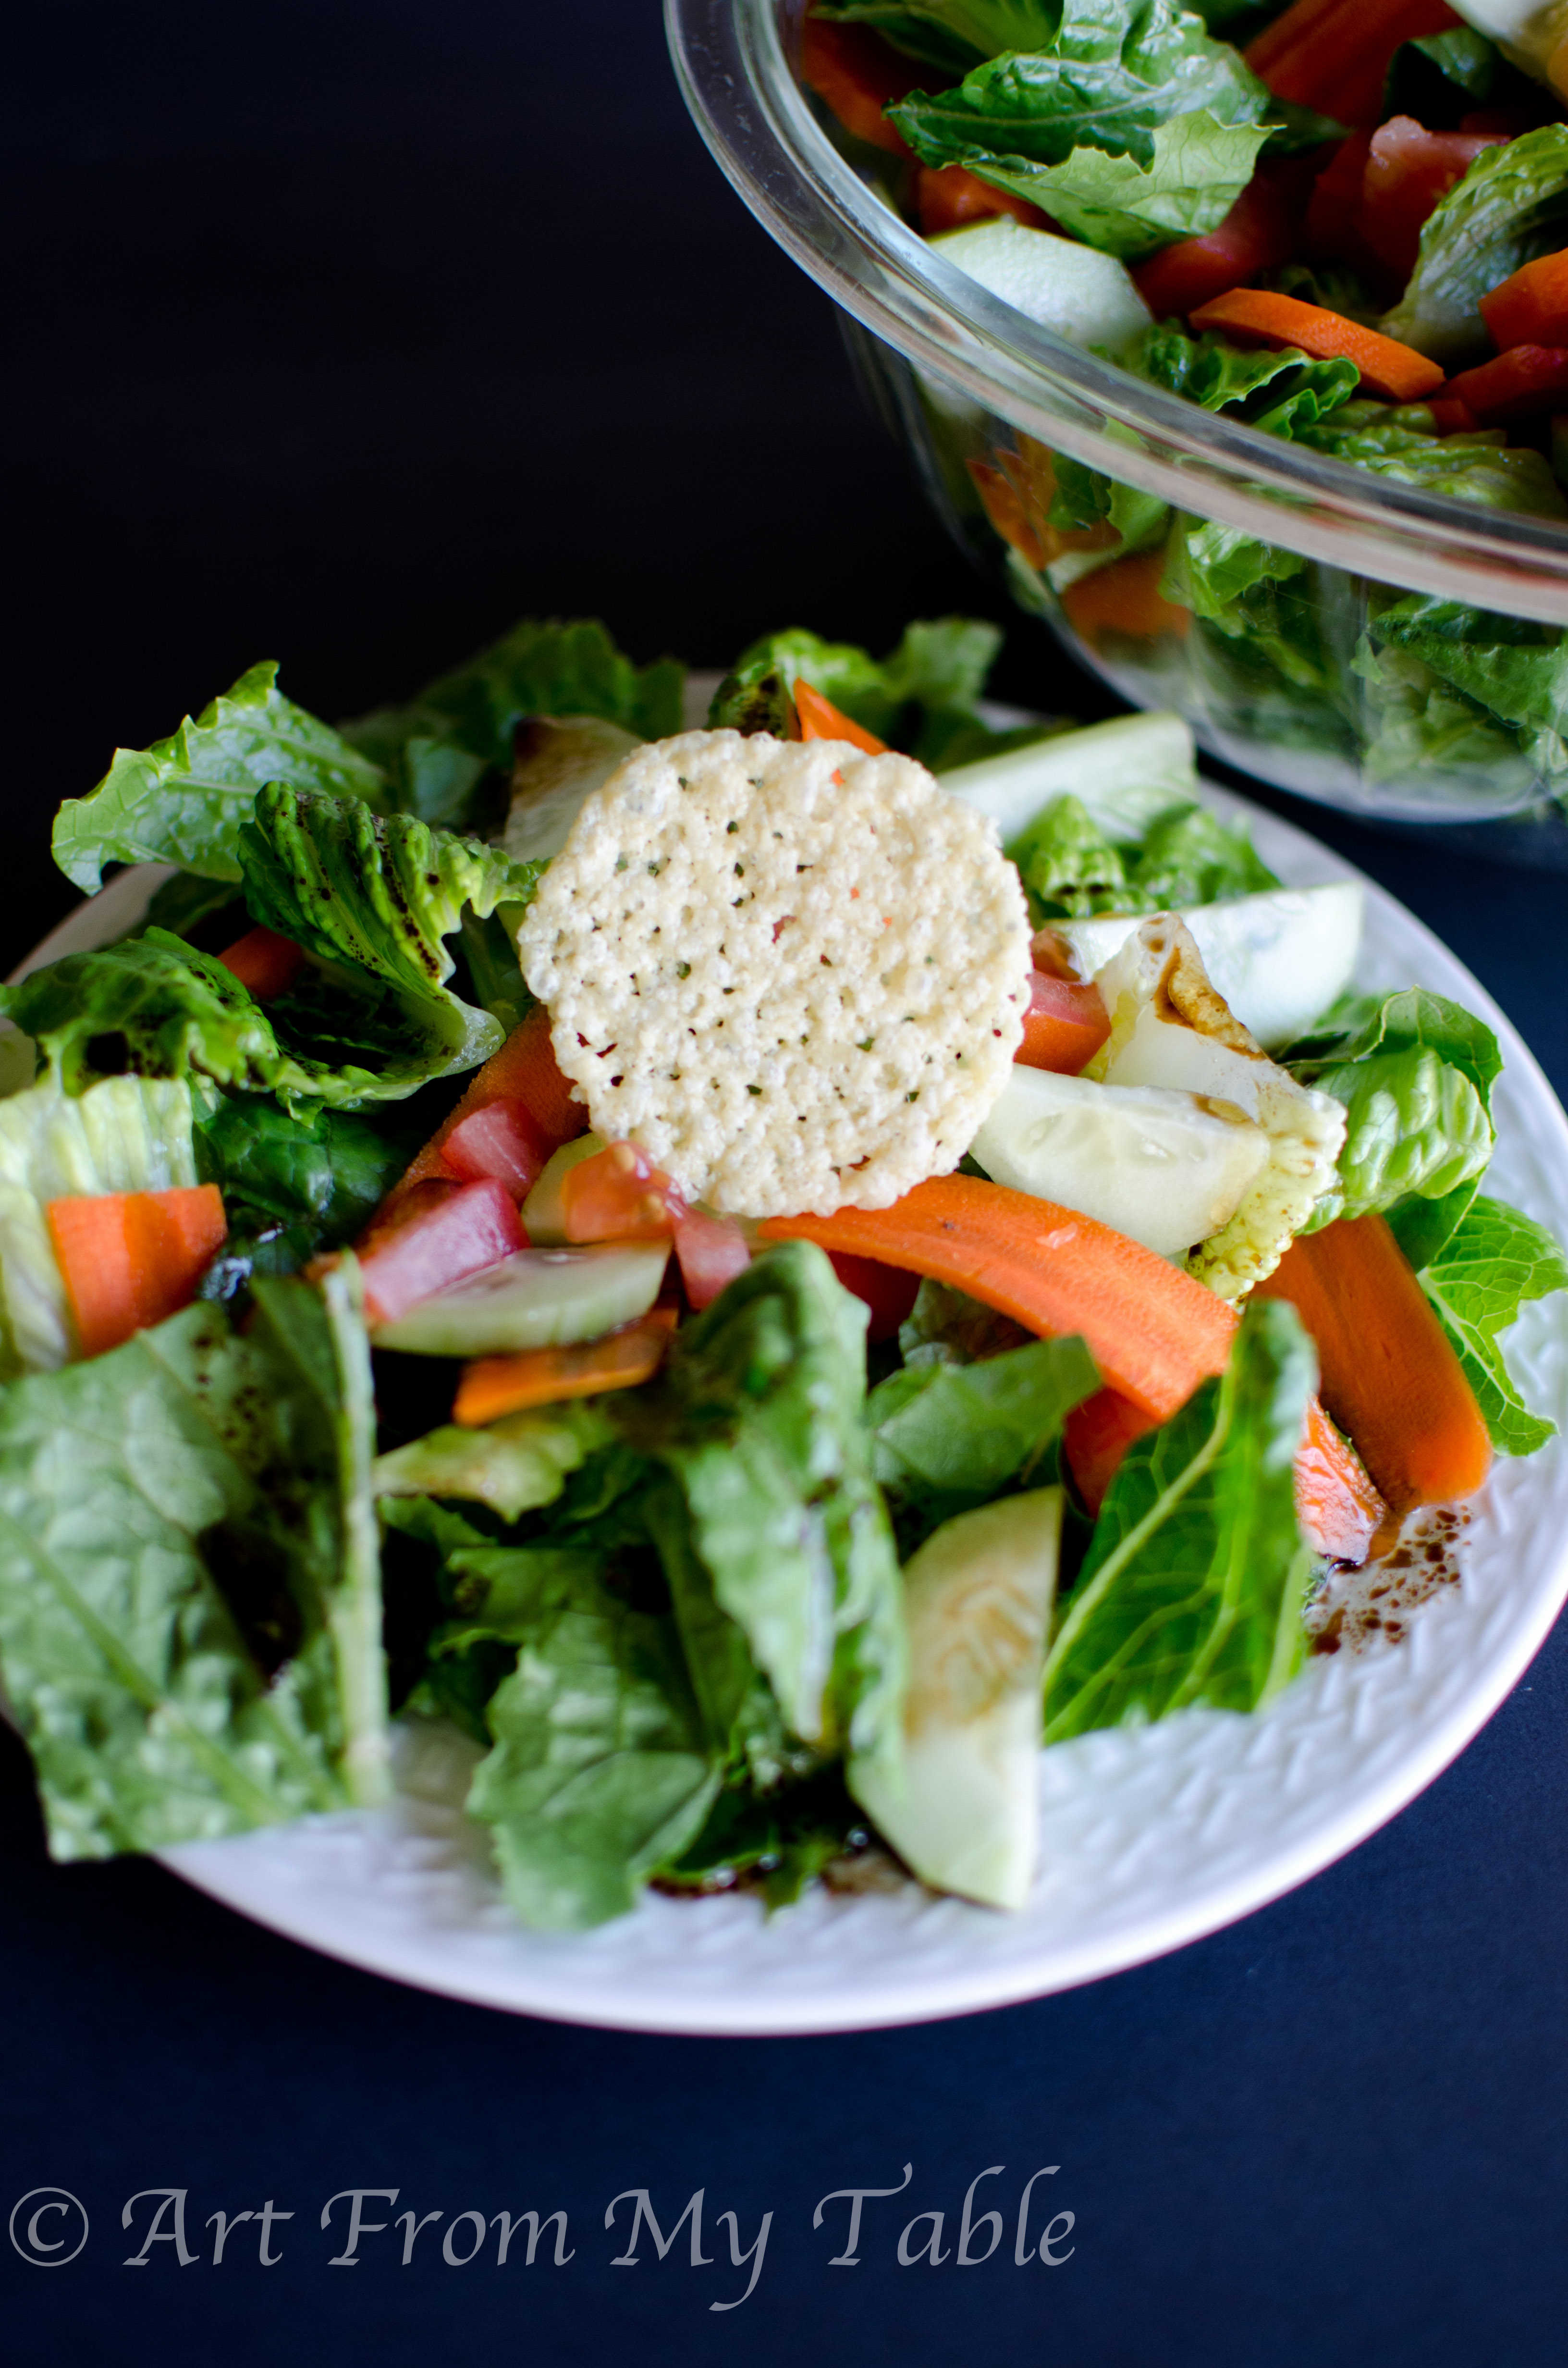 Parmesan crisps topping a salad instead of croutons. 